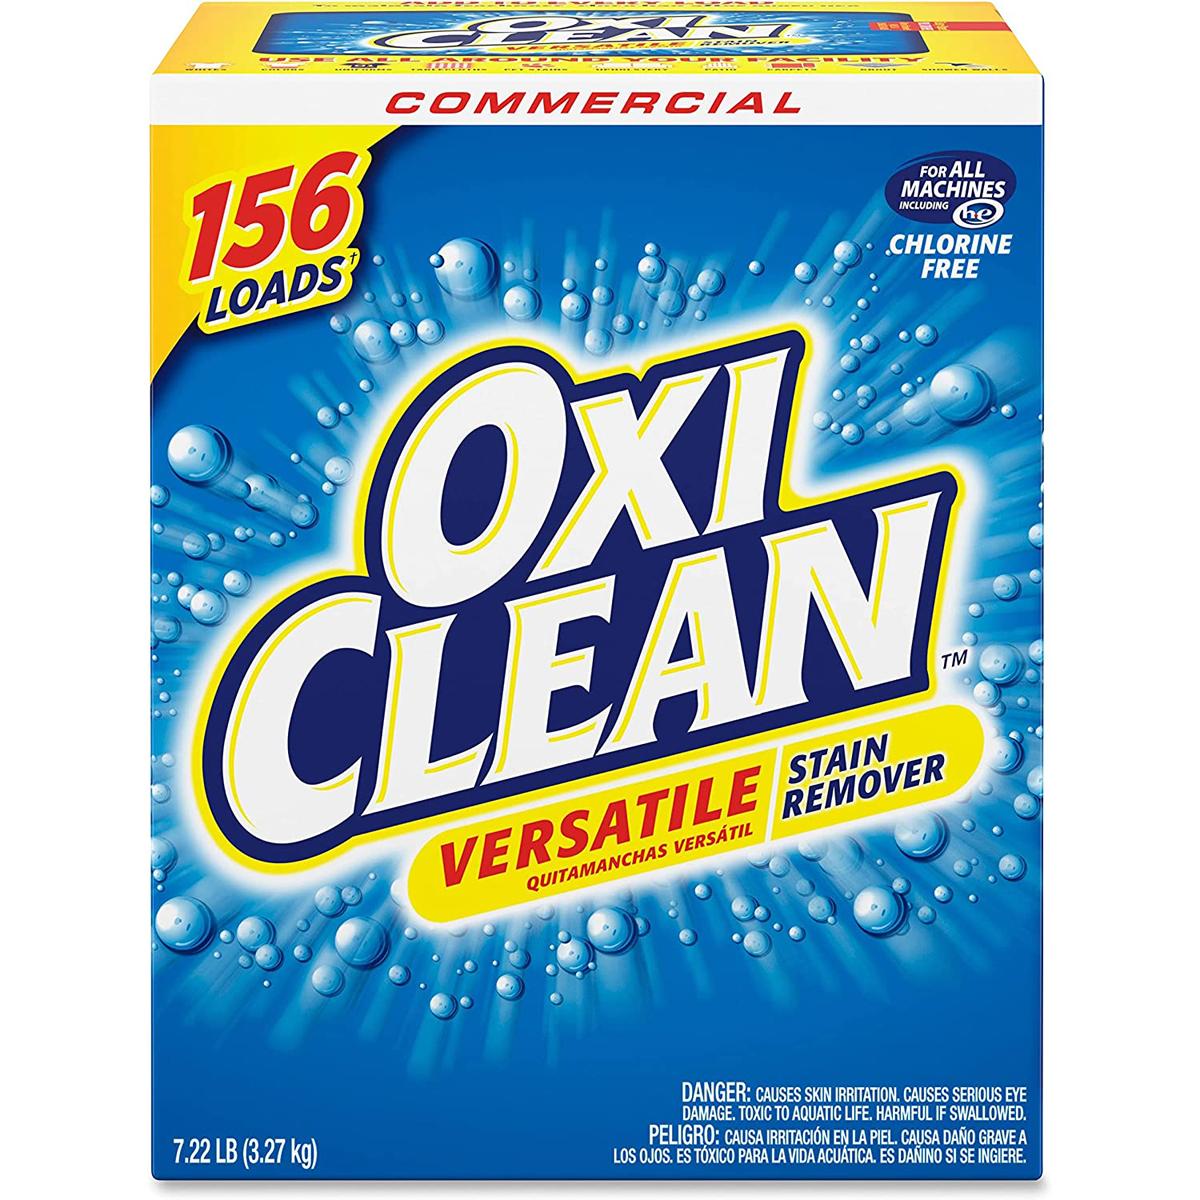 OxiClean Versatile Stain Remover Powder for $8.44 Shipped